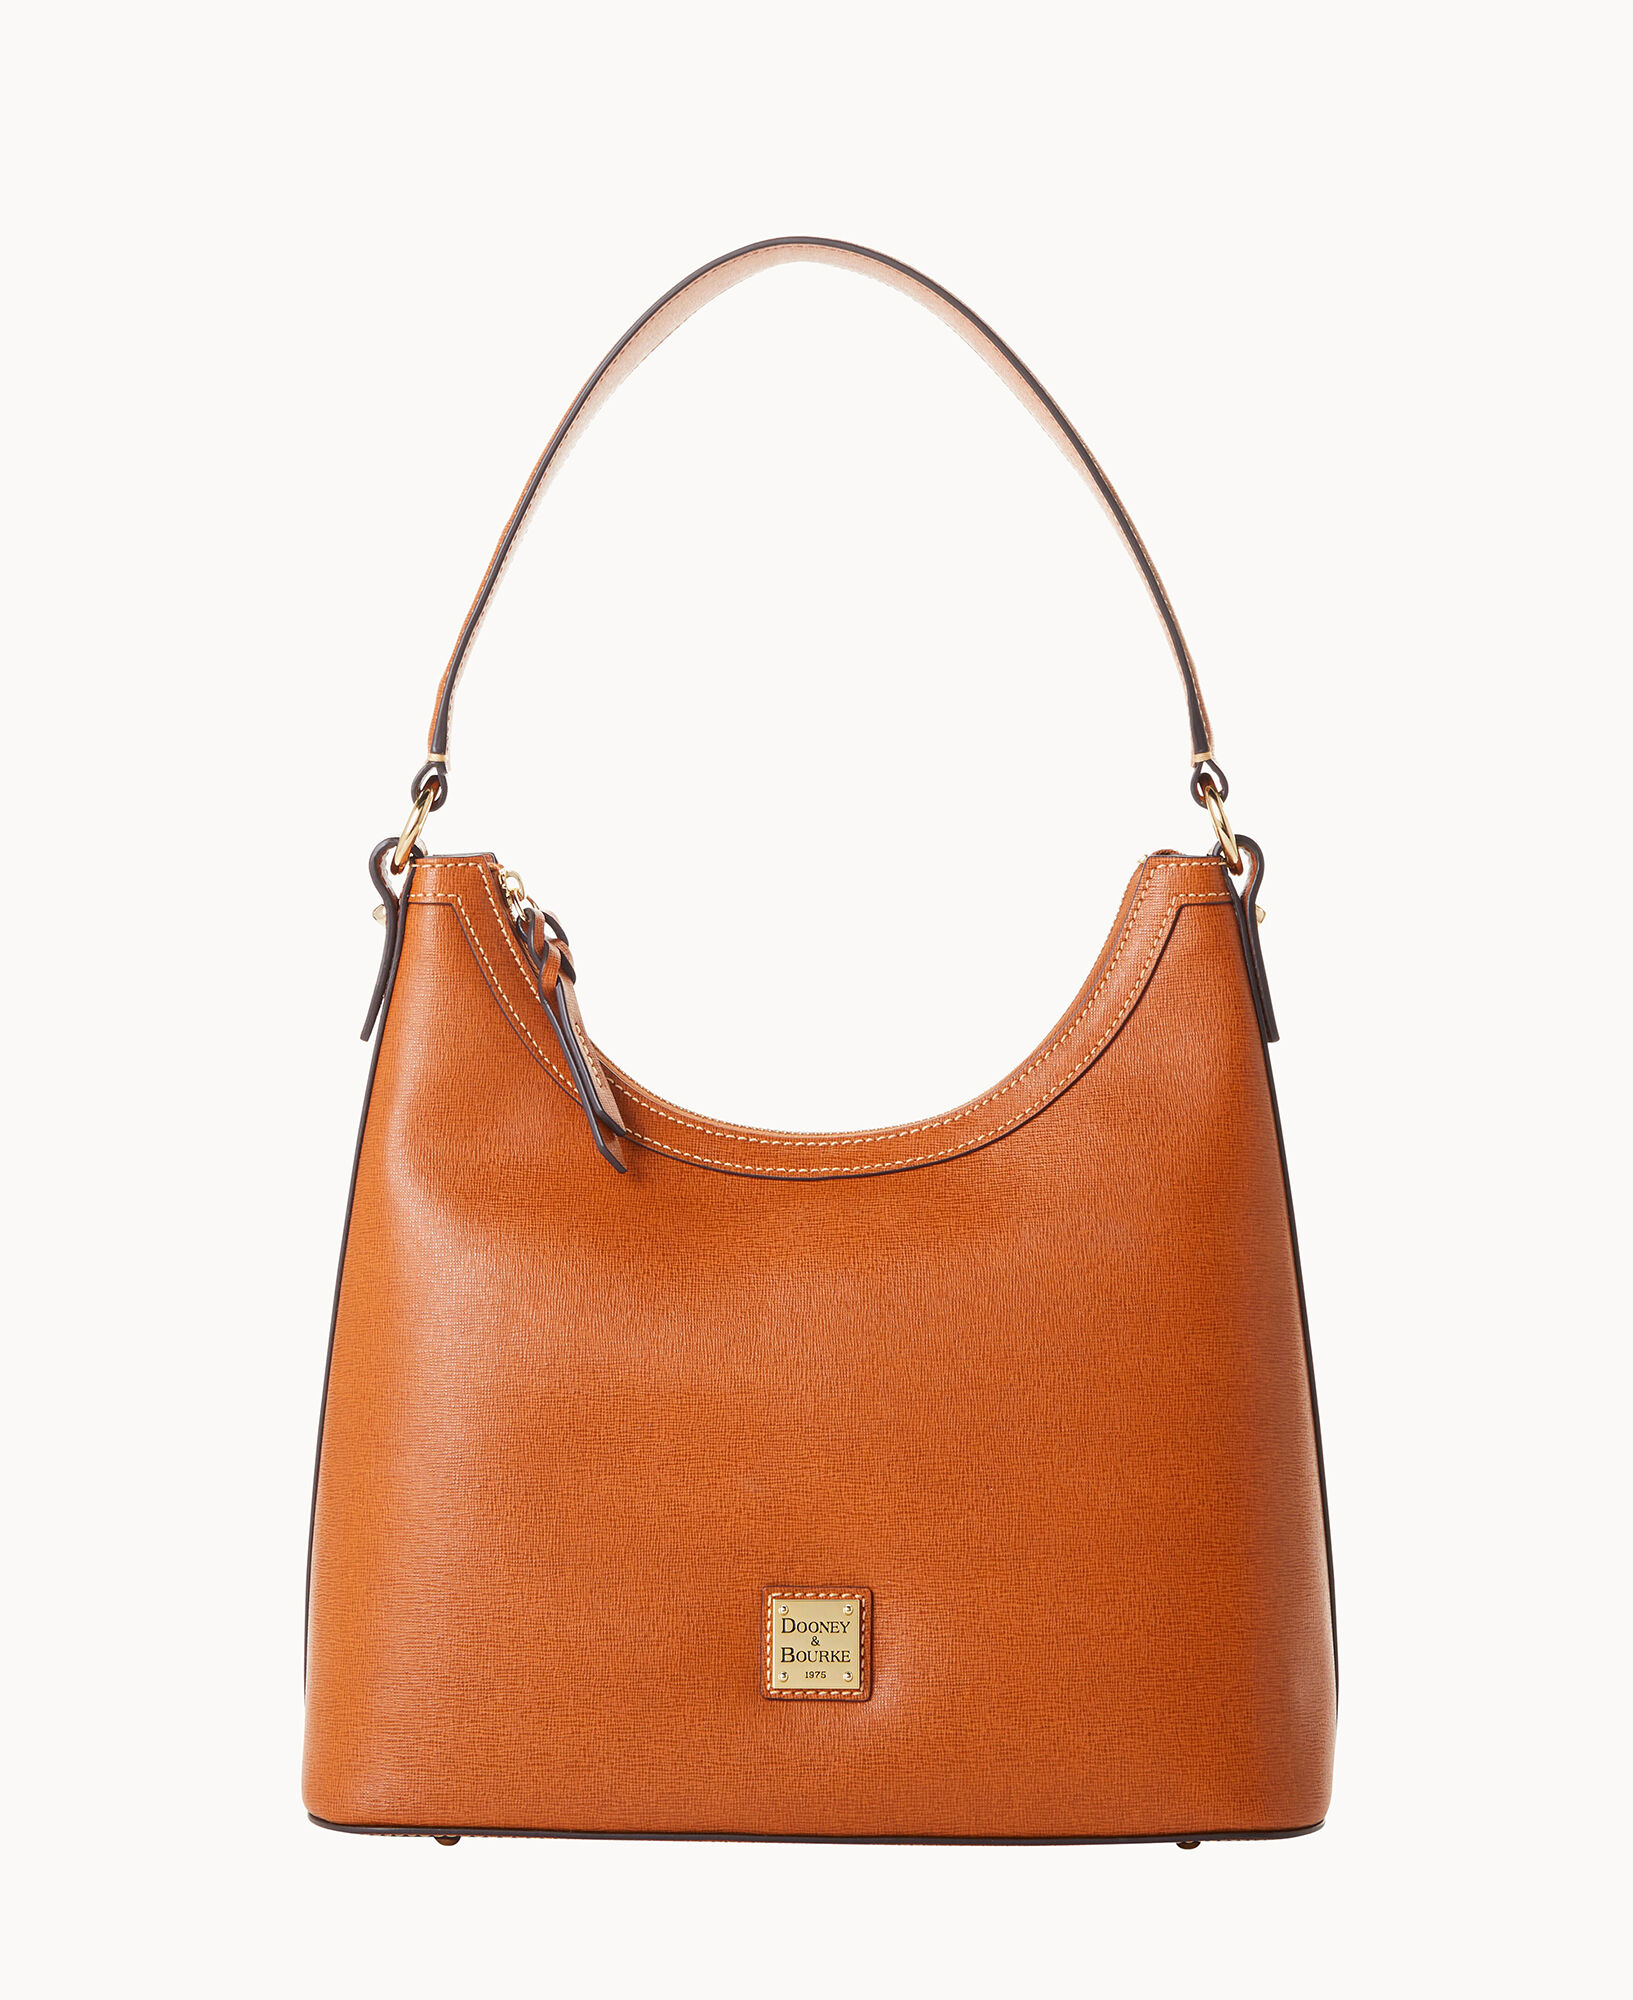 Dooney & Bourke - Our European Saffiano leather lends exceptional